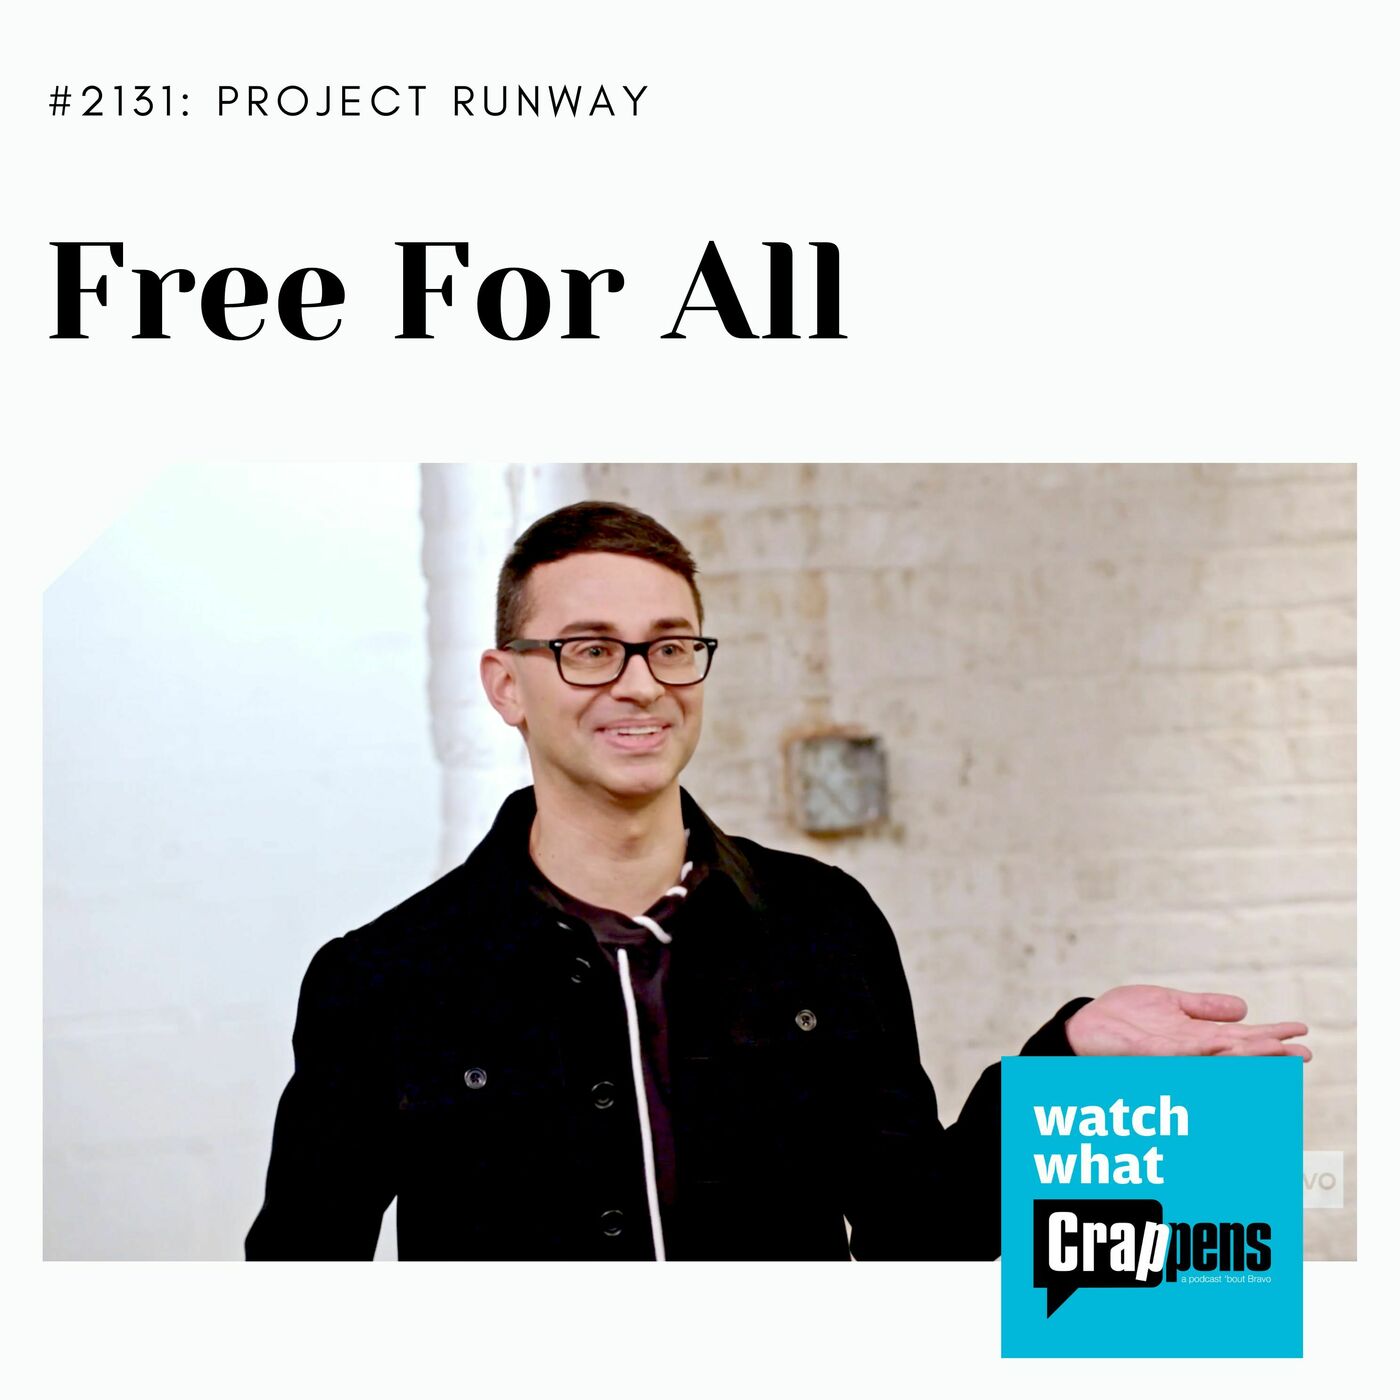 Project Runway: Free for All